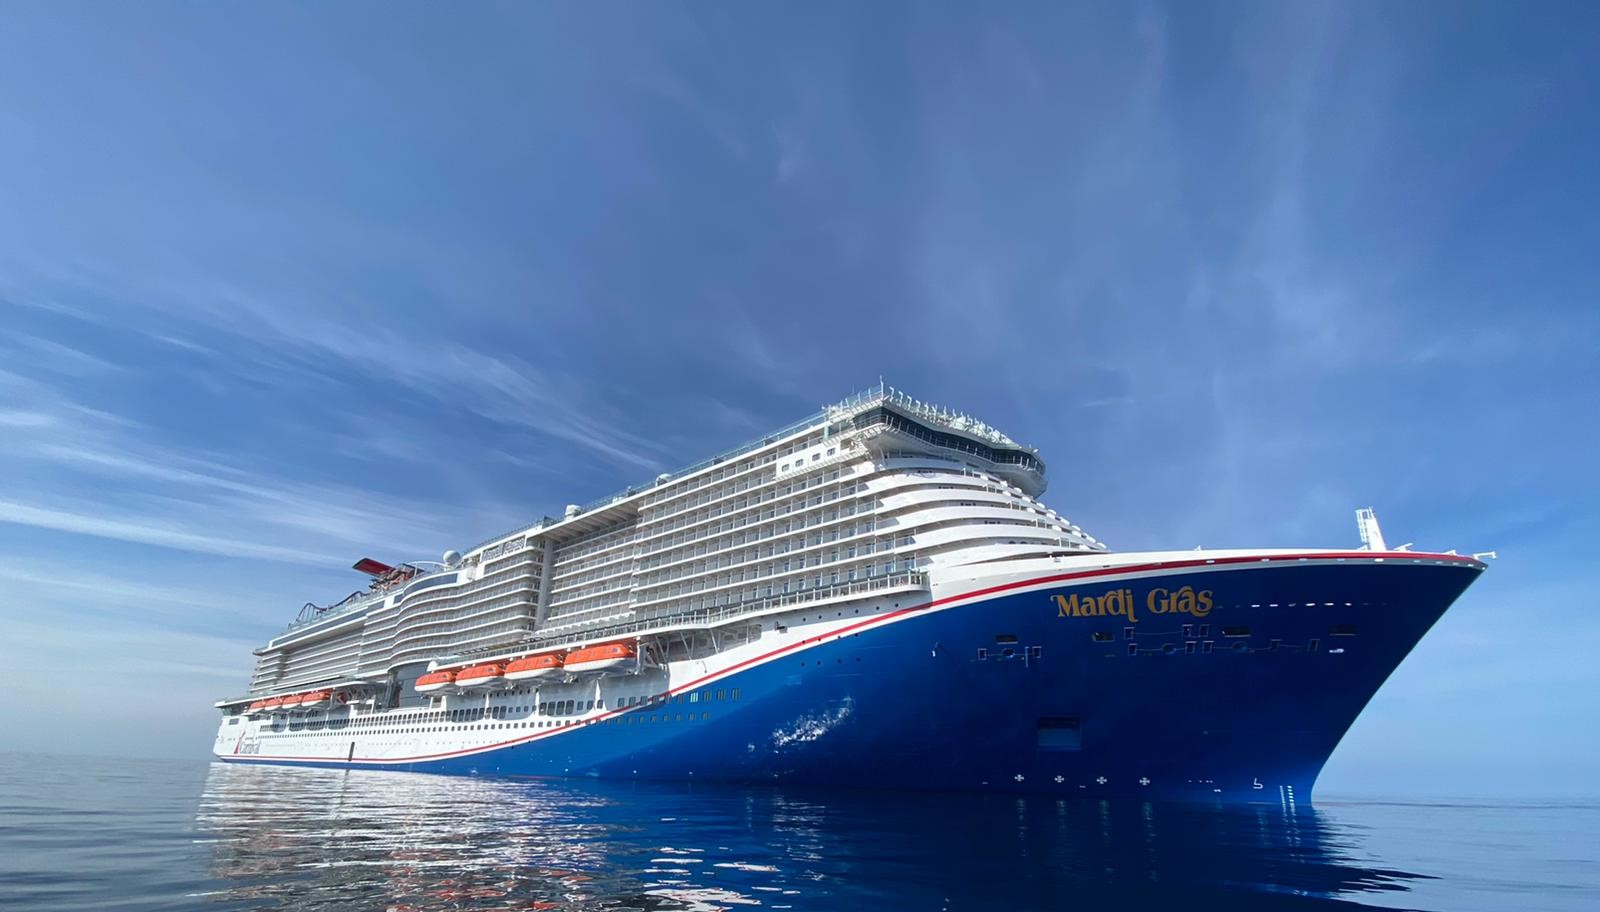 The Bahamas Maritime Authority (BMA) is delighted to welcome its first Liquified Natural Gas (LNG) powered passenger ship, MARDI GRAS, to the Flag.